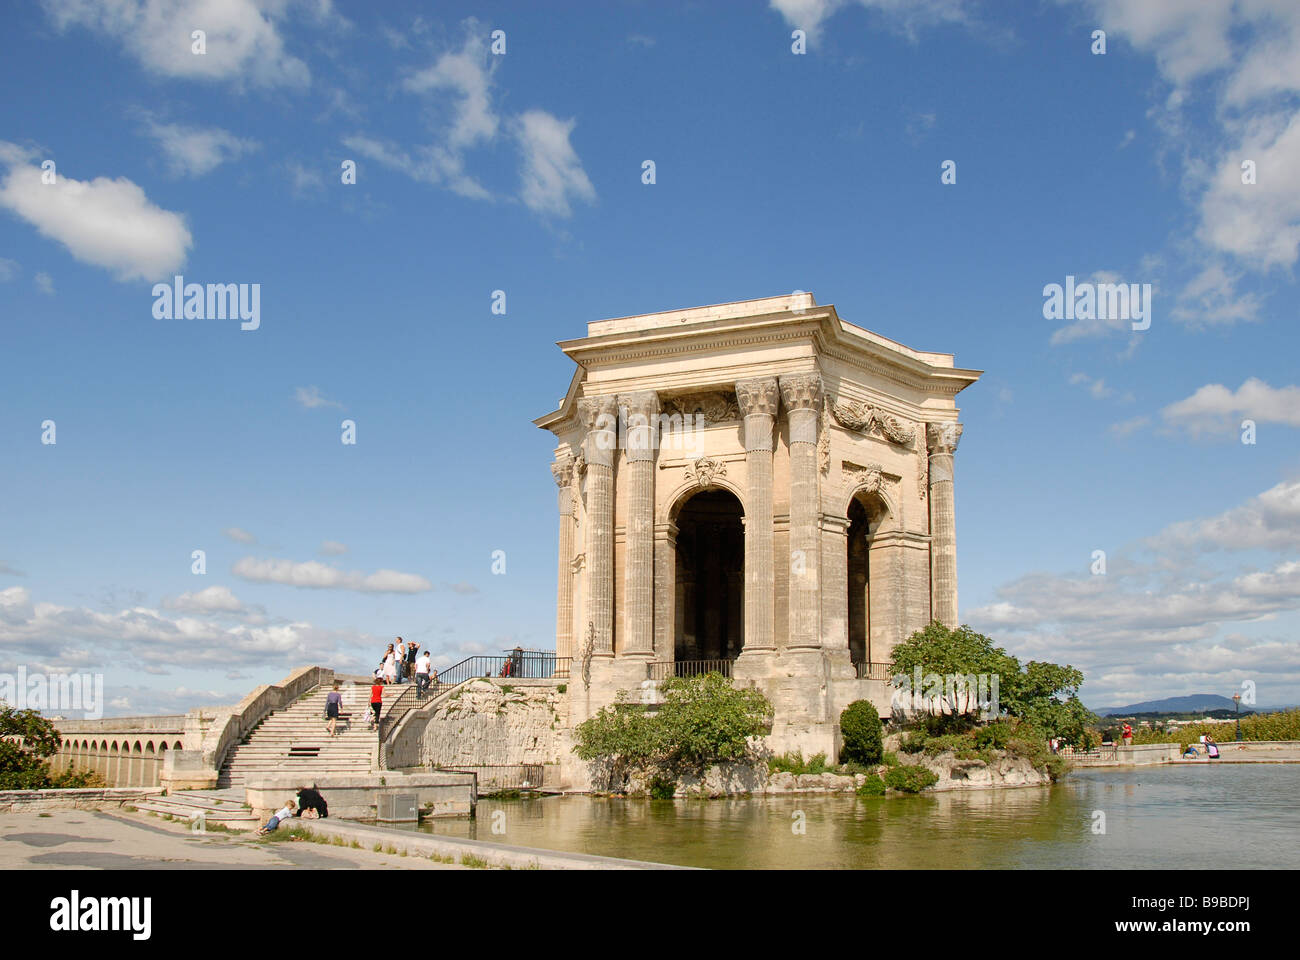 Water tower, chateau d'deau, Corinthian temple with water reservoir, Montpellier, France Stock Photo